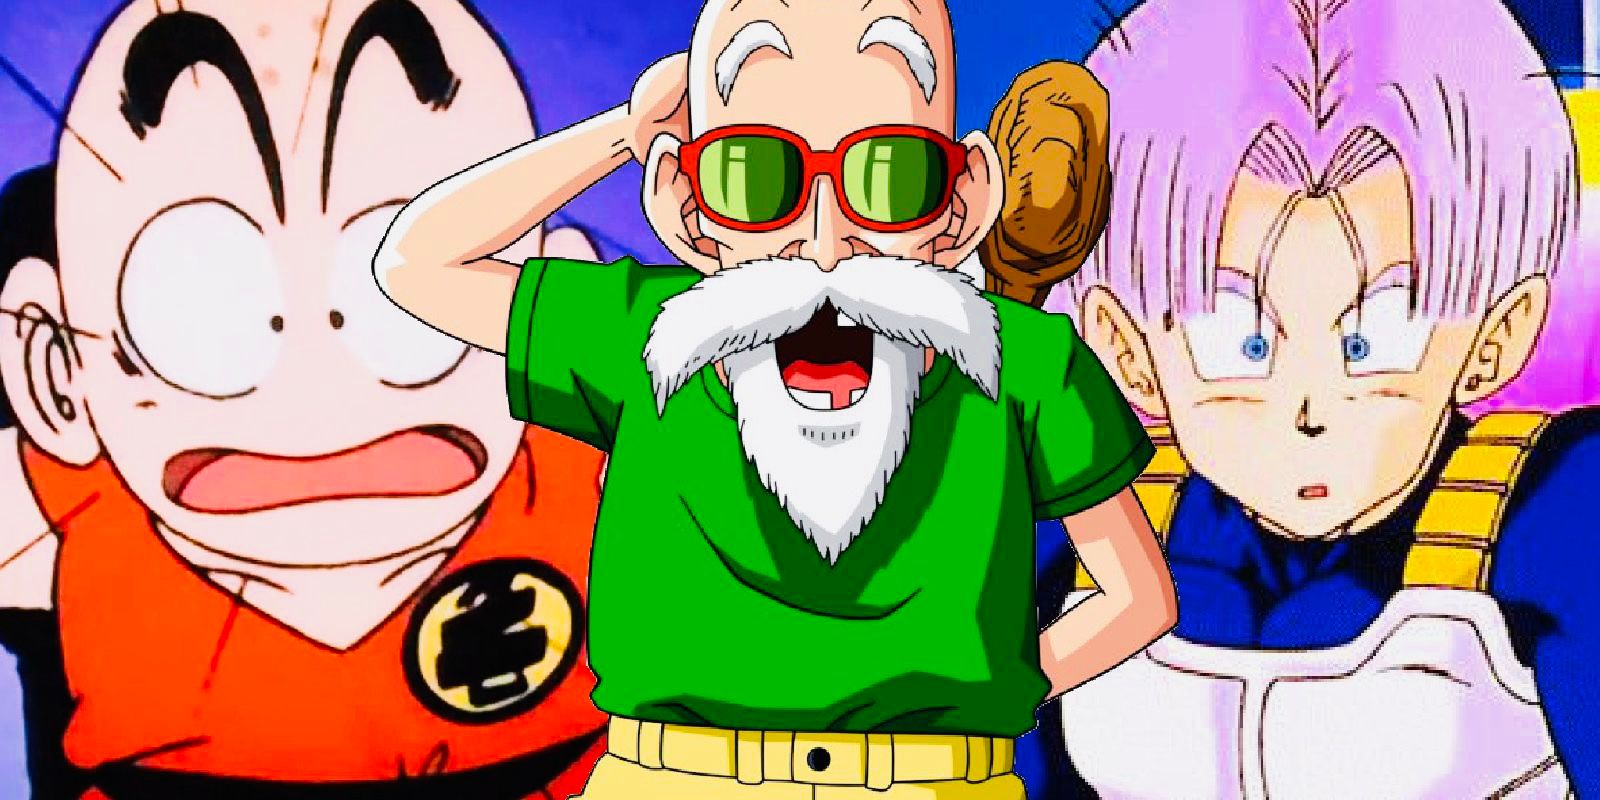 Future trunks and Krillin surprised by Master Roshi in Dragon Ball Z